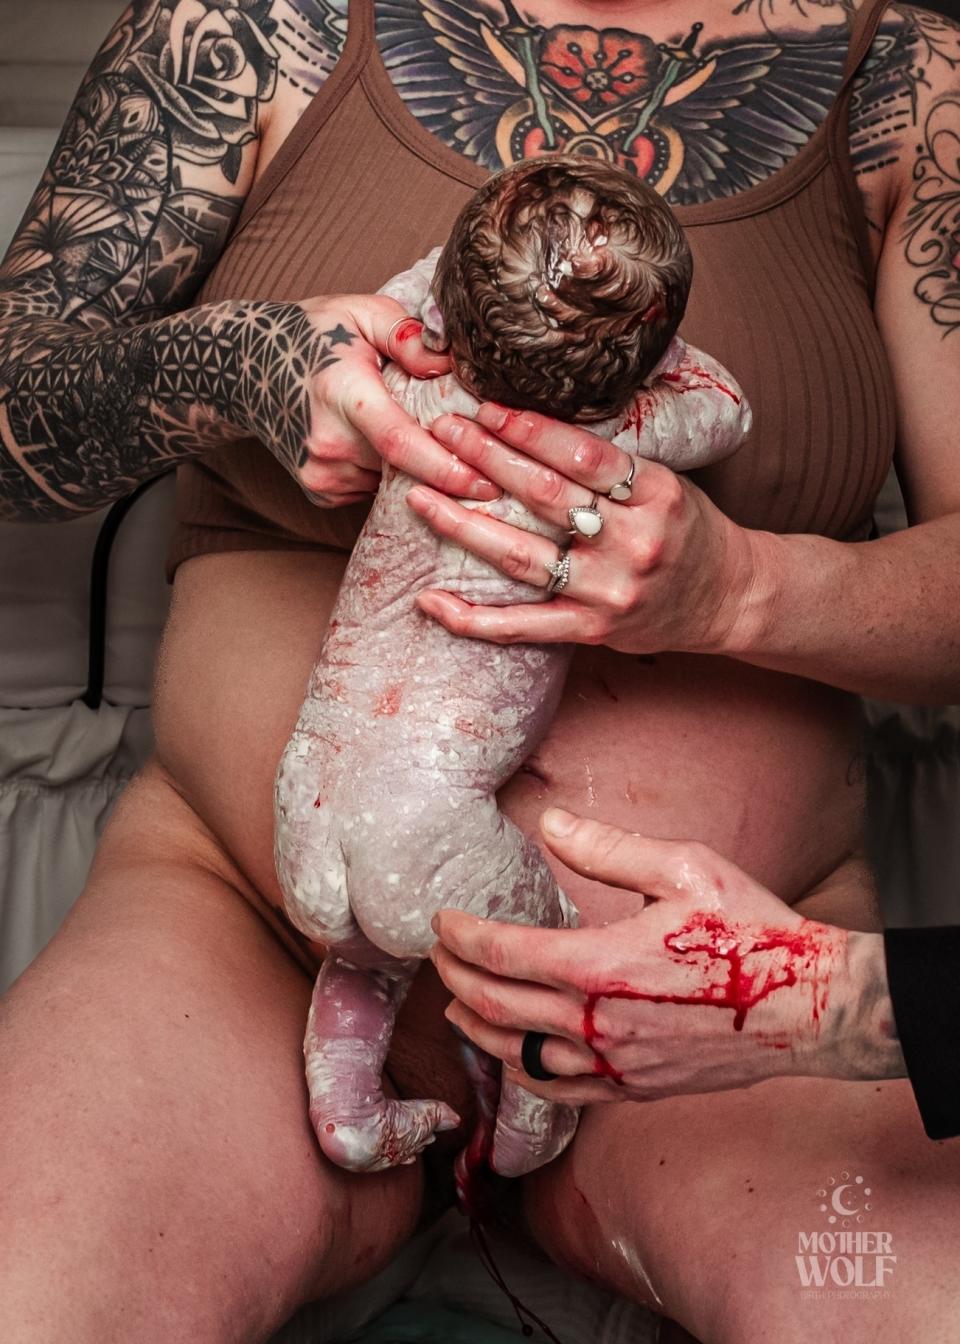 A newborn is cradled by a person with tattoos immediately after birth